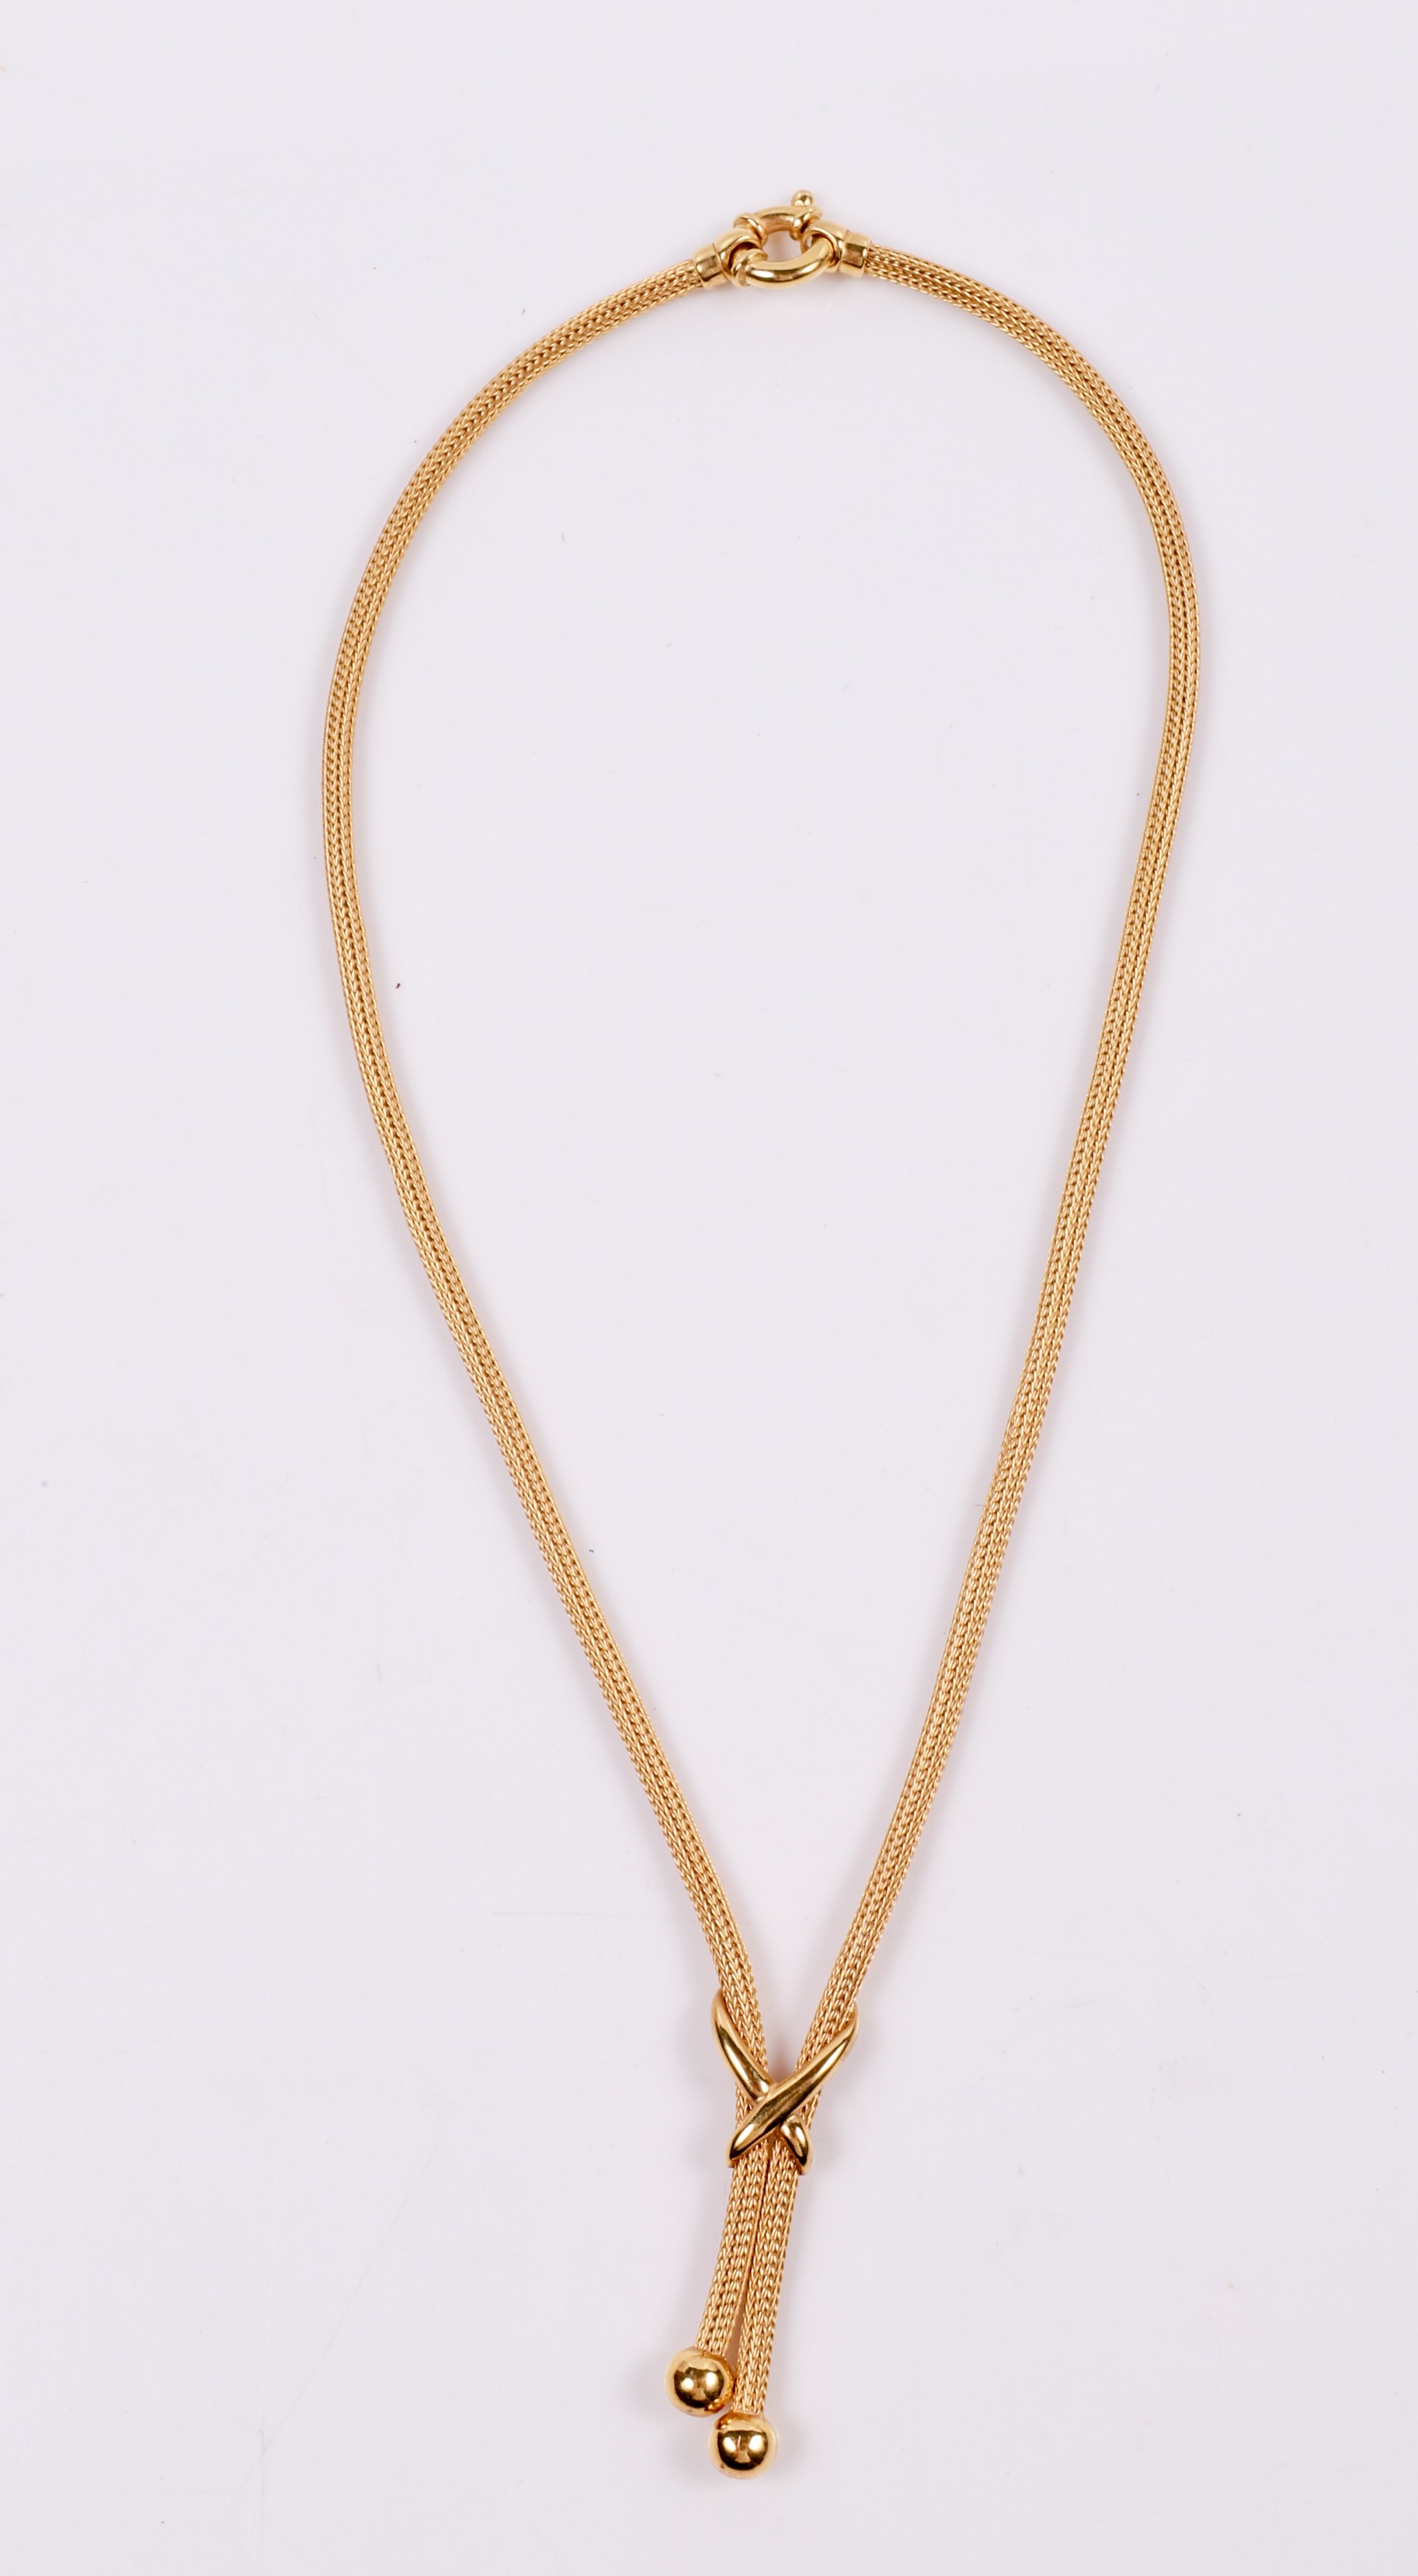  1 18K Yellow gold mesh necklace  3b6014